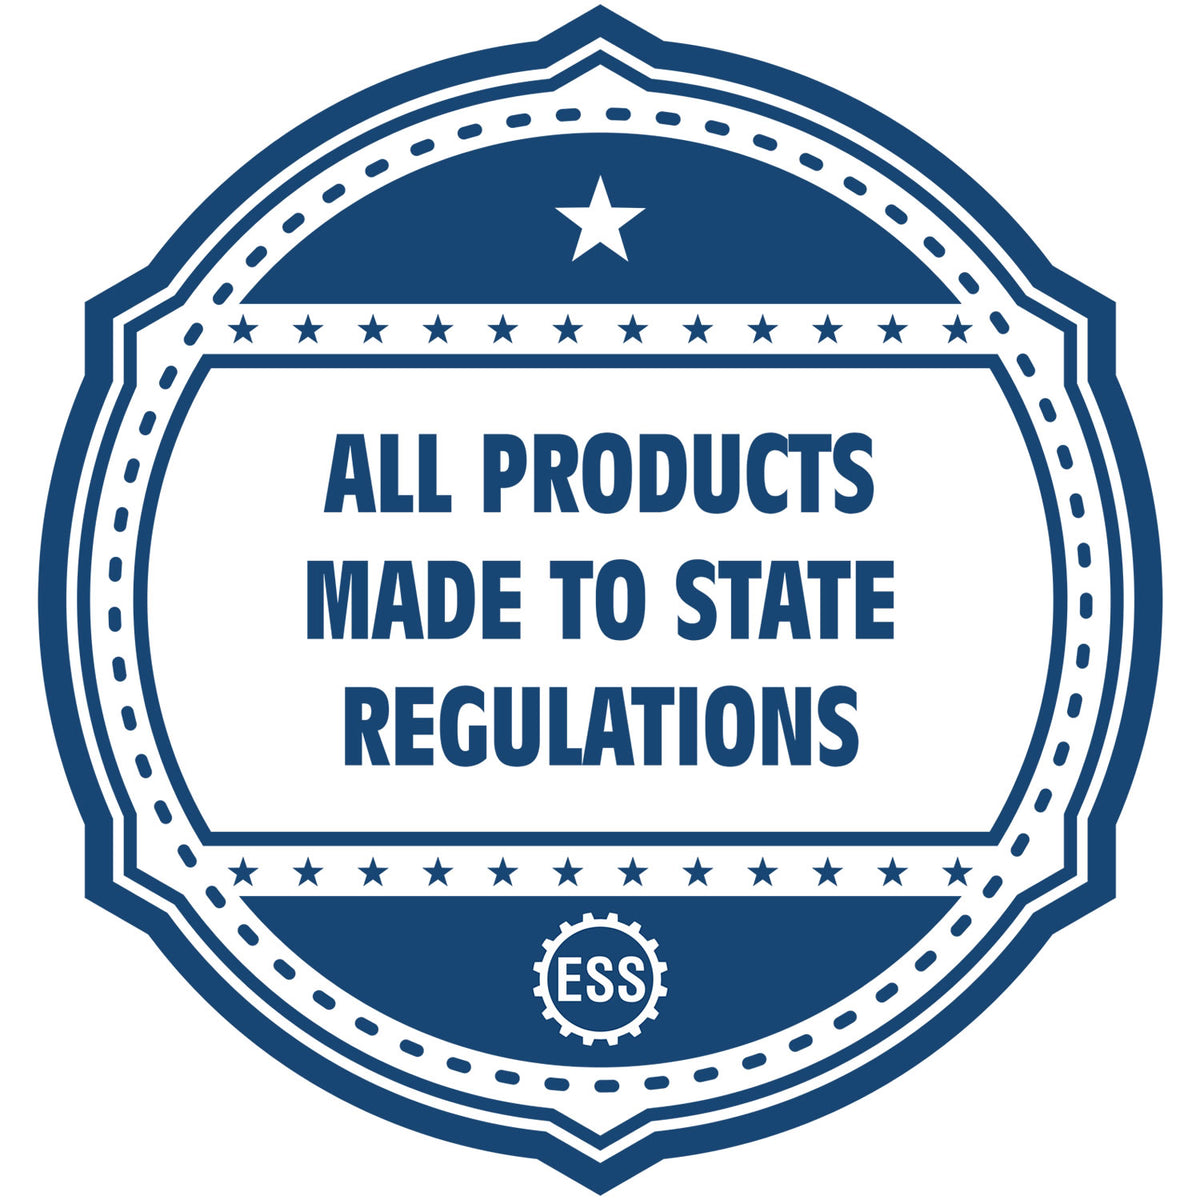 An icon or badge element for the Heavy Duty Cast Iron Illinois Engineer Seal Embosser showing that this product is made in compliance with state regulations.